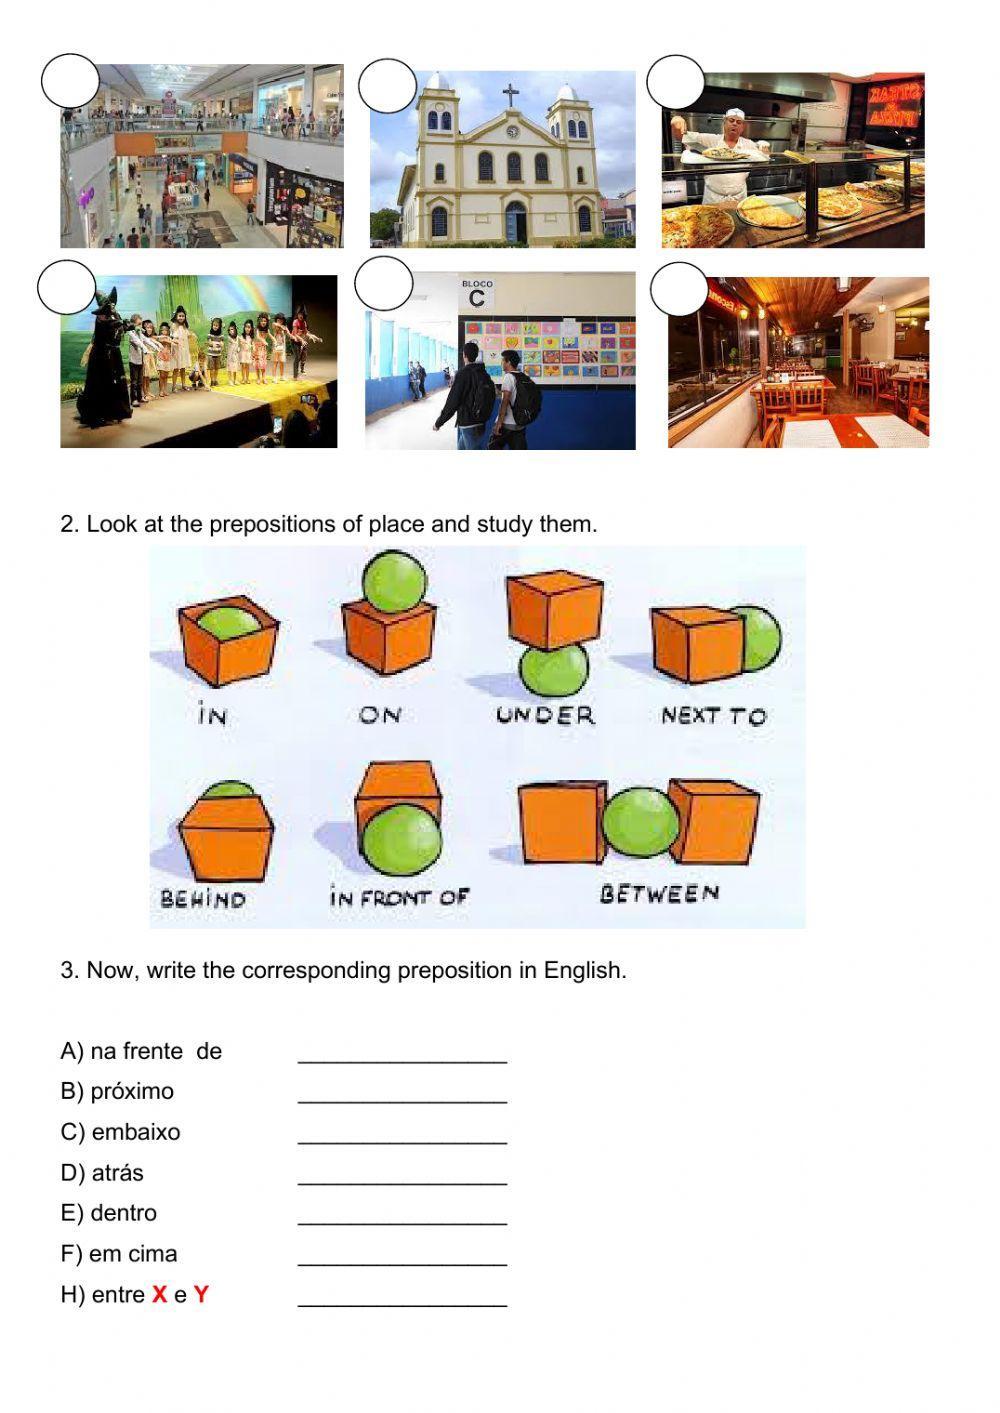 Places in the city and place prepositions